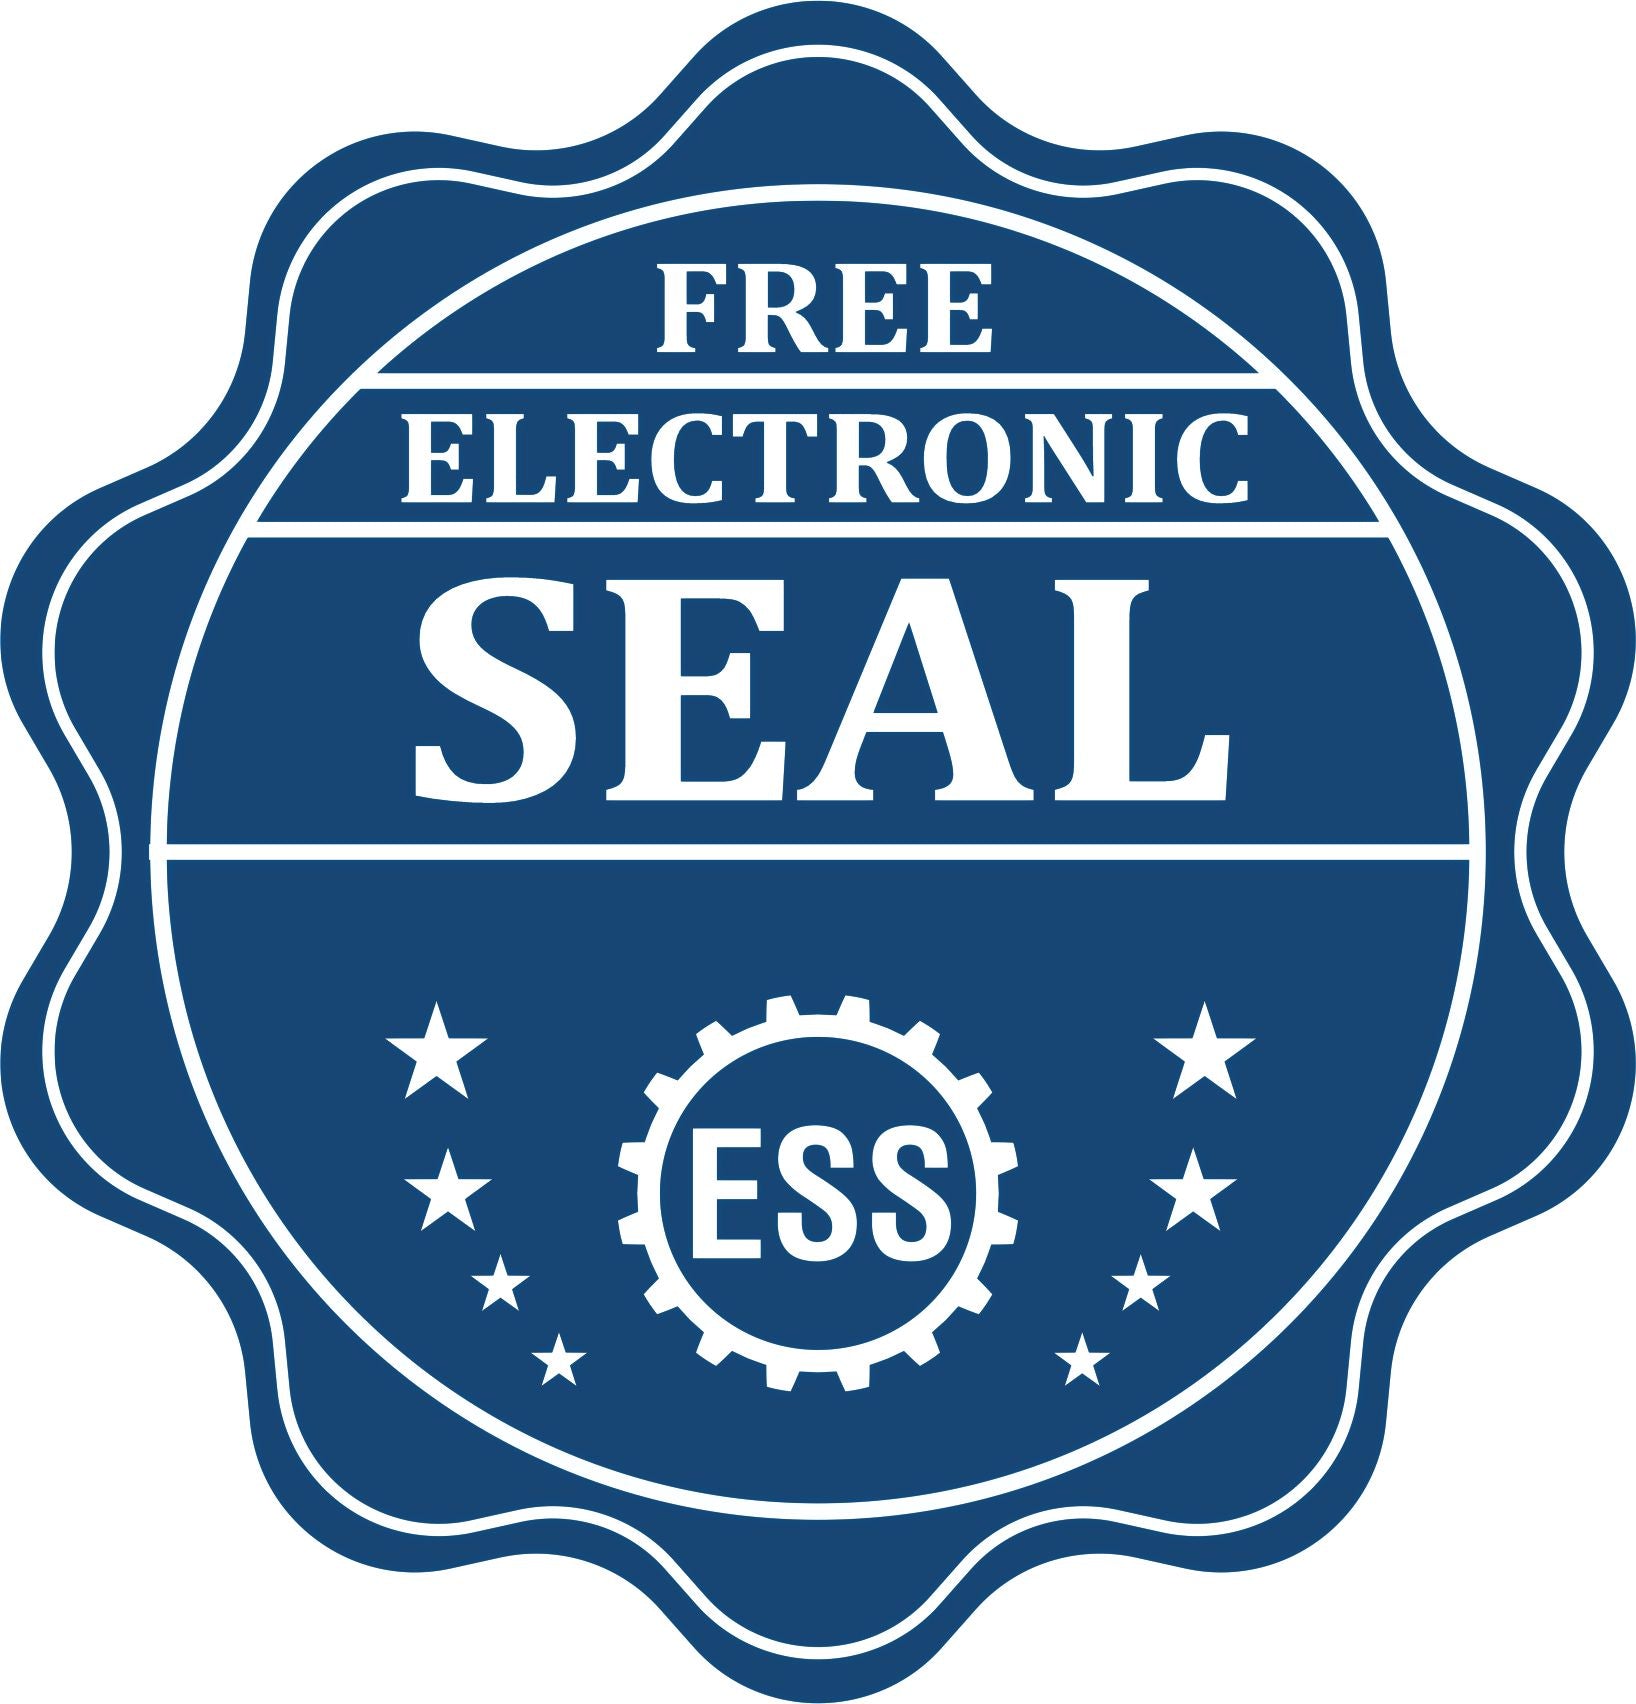 A badge showing a free electronic seal for the Hybrid Virginia Engineer Seal with stars and the ESS gear on the emblem.